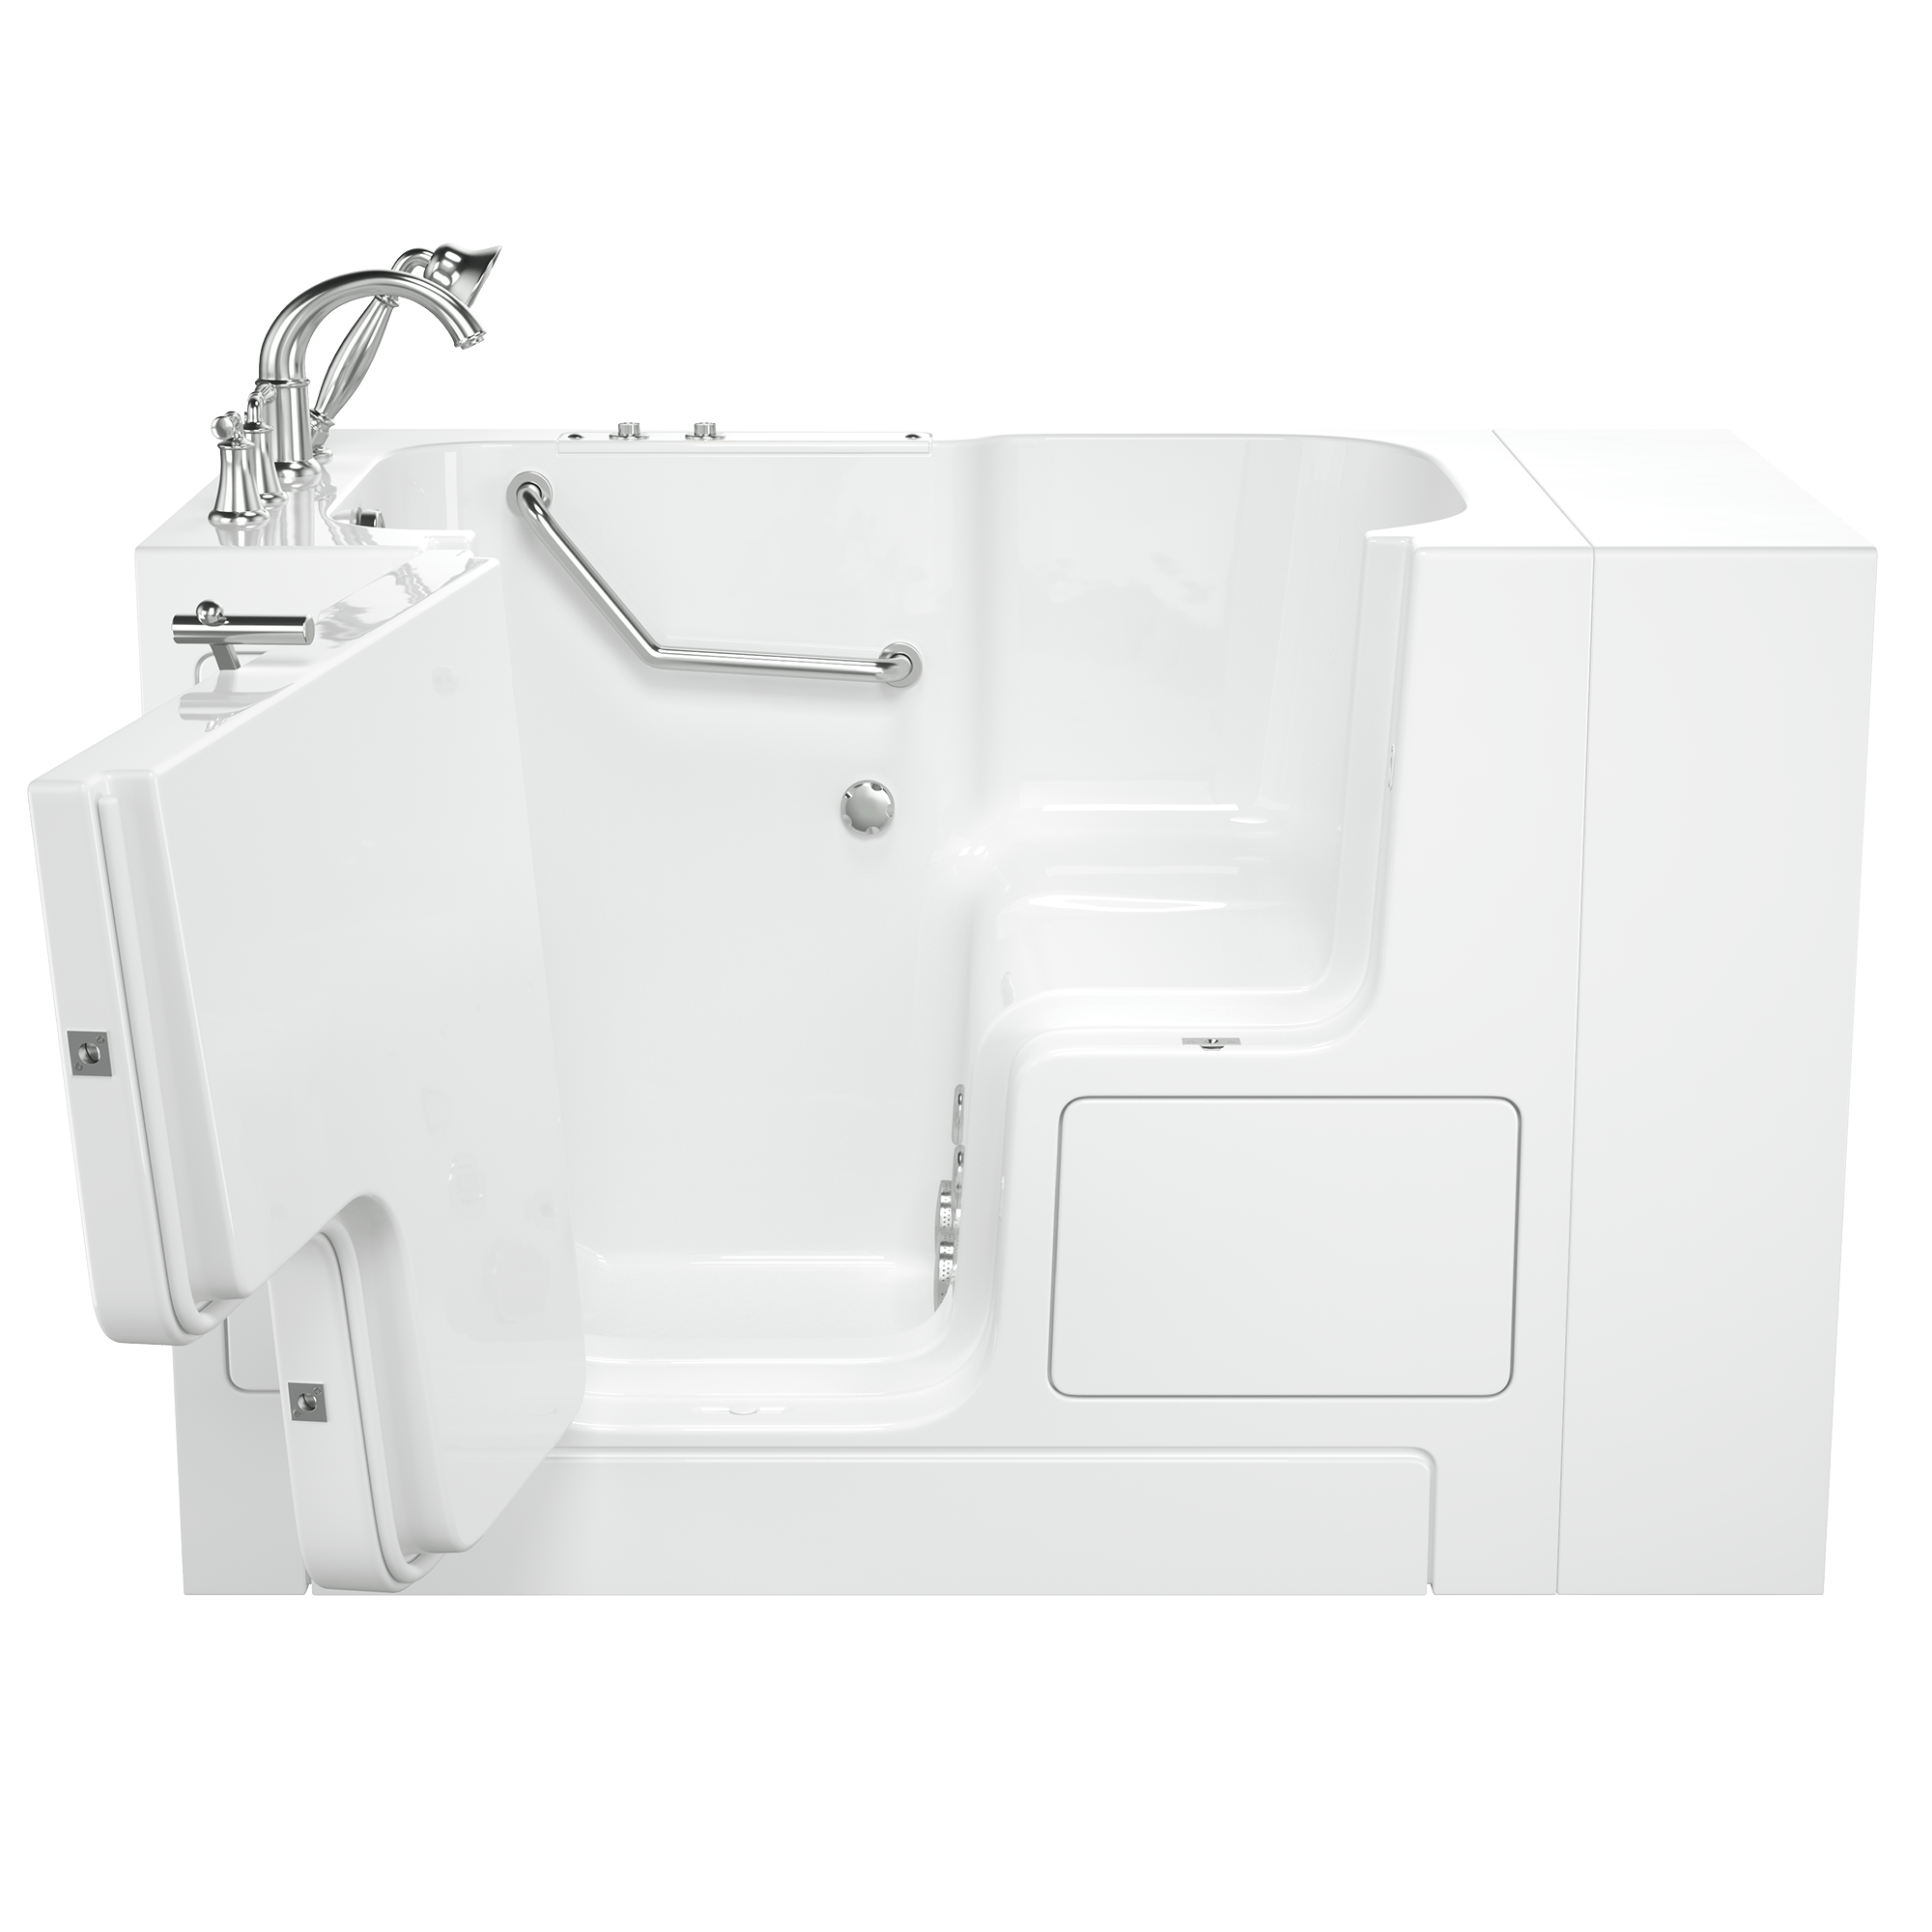 Gelcoat Value Series 32 x 52 -Inch Walk-in Tub With Whirlpool System - Left-Hand Drain With Faucet